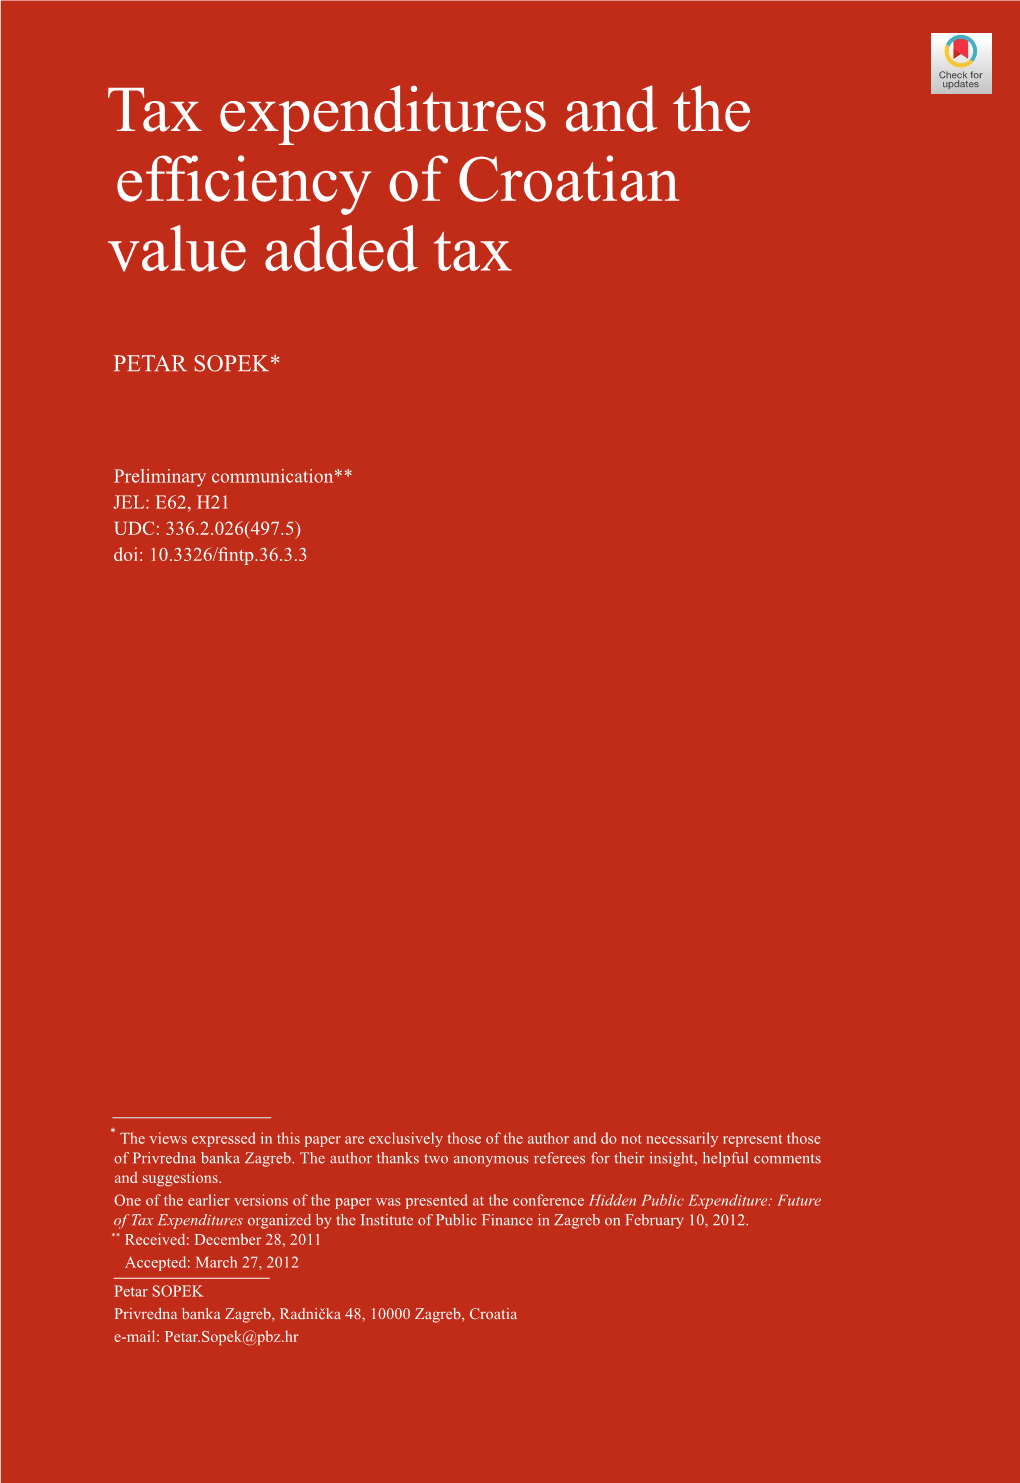 Tax Expenditures and the Efficiency of Croatian Value Added Tax